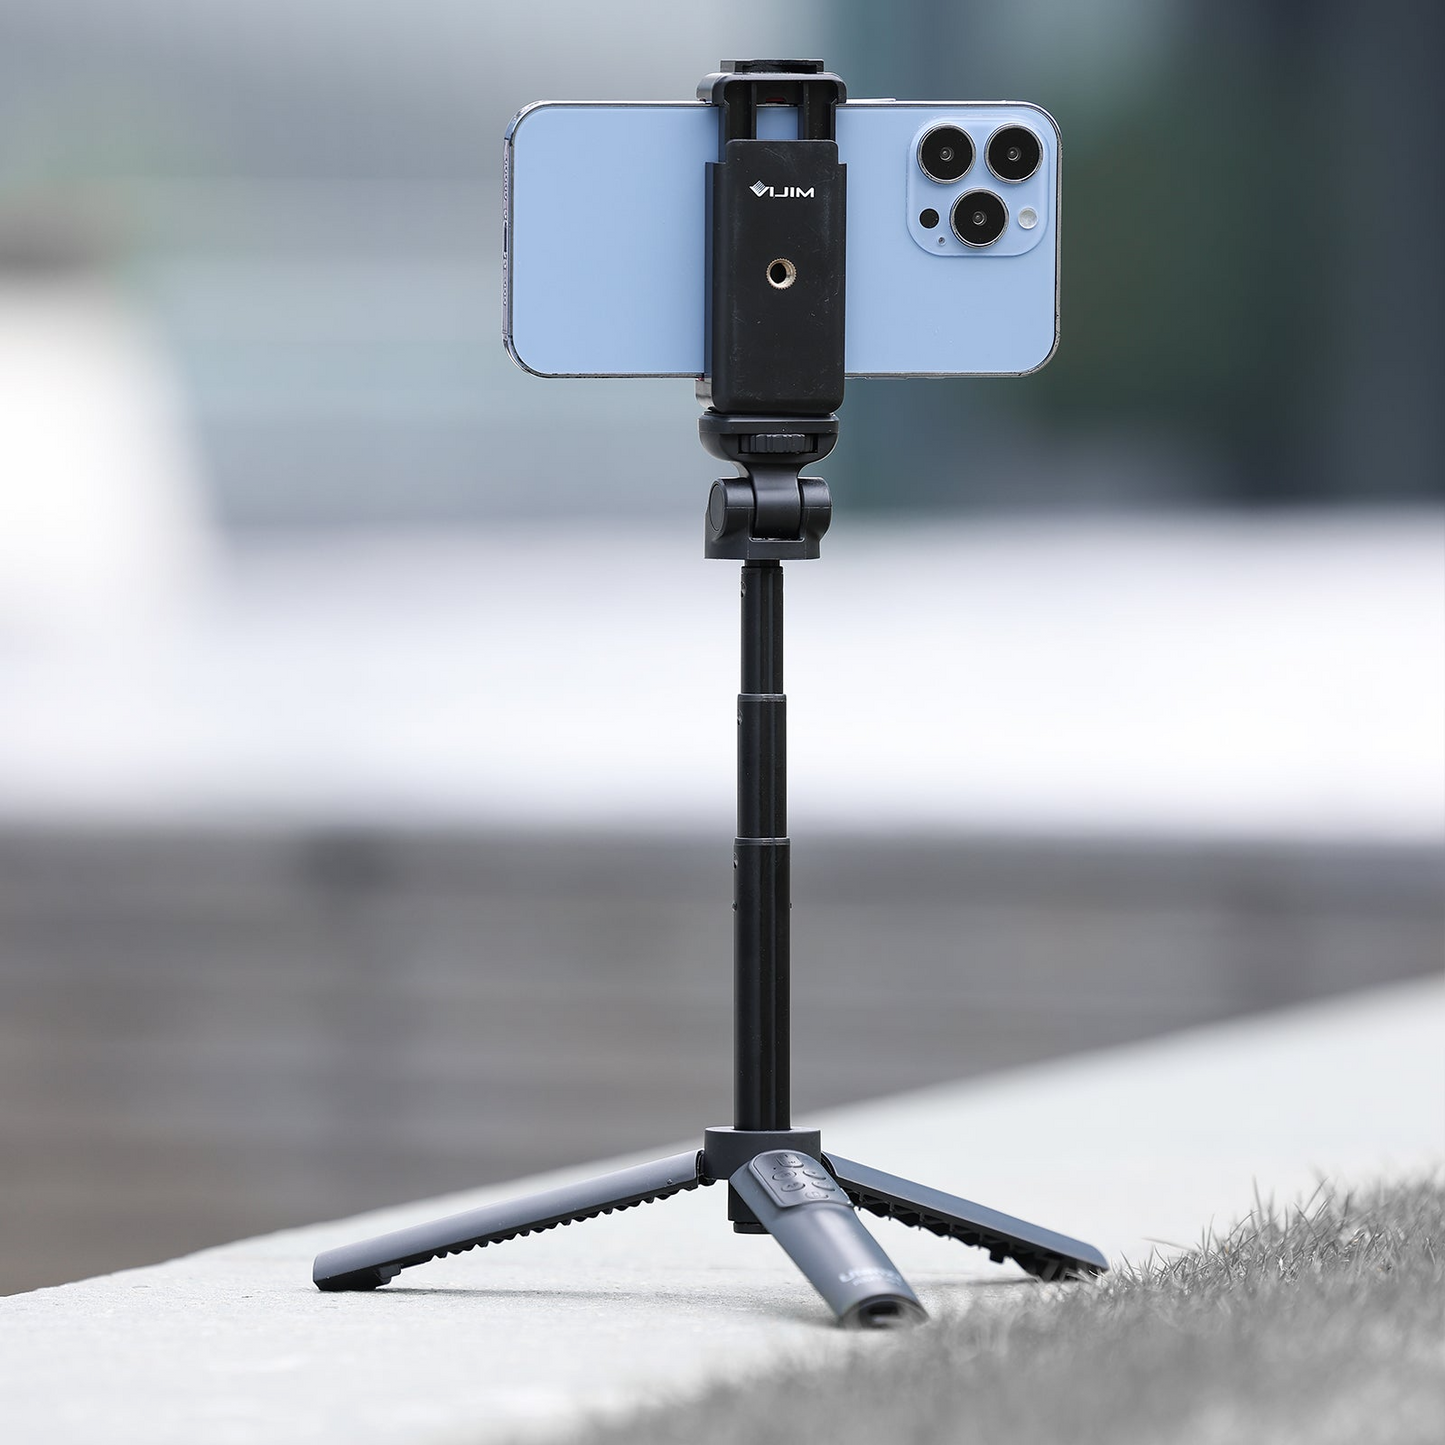 Ulanzi RMT-01 Aluminum Wireless Bluetooth Extendable Tripod Type C with 1.5kg Load Capacity, 180 Degree Adjustable Ballhead with Damper, Zoom and Record Buttons for Smartphones, Android, Camera | 2888